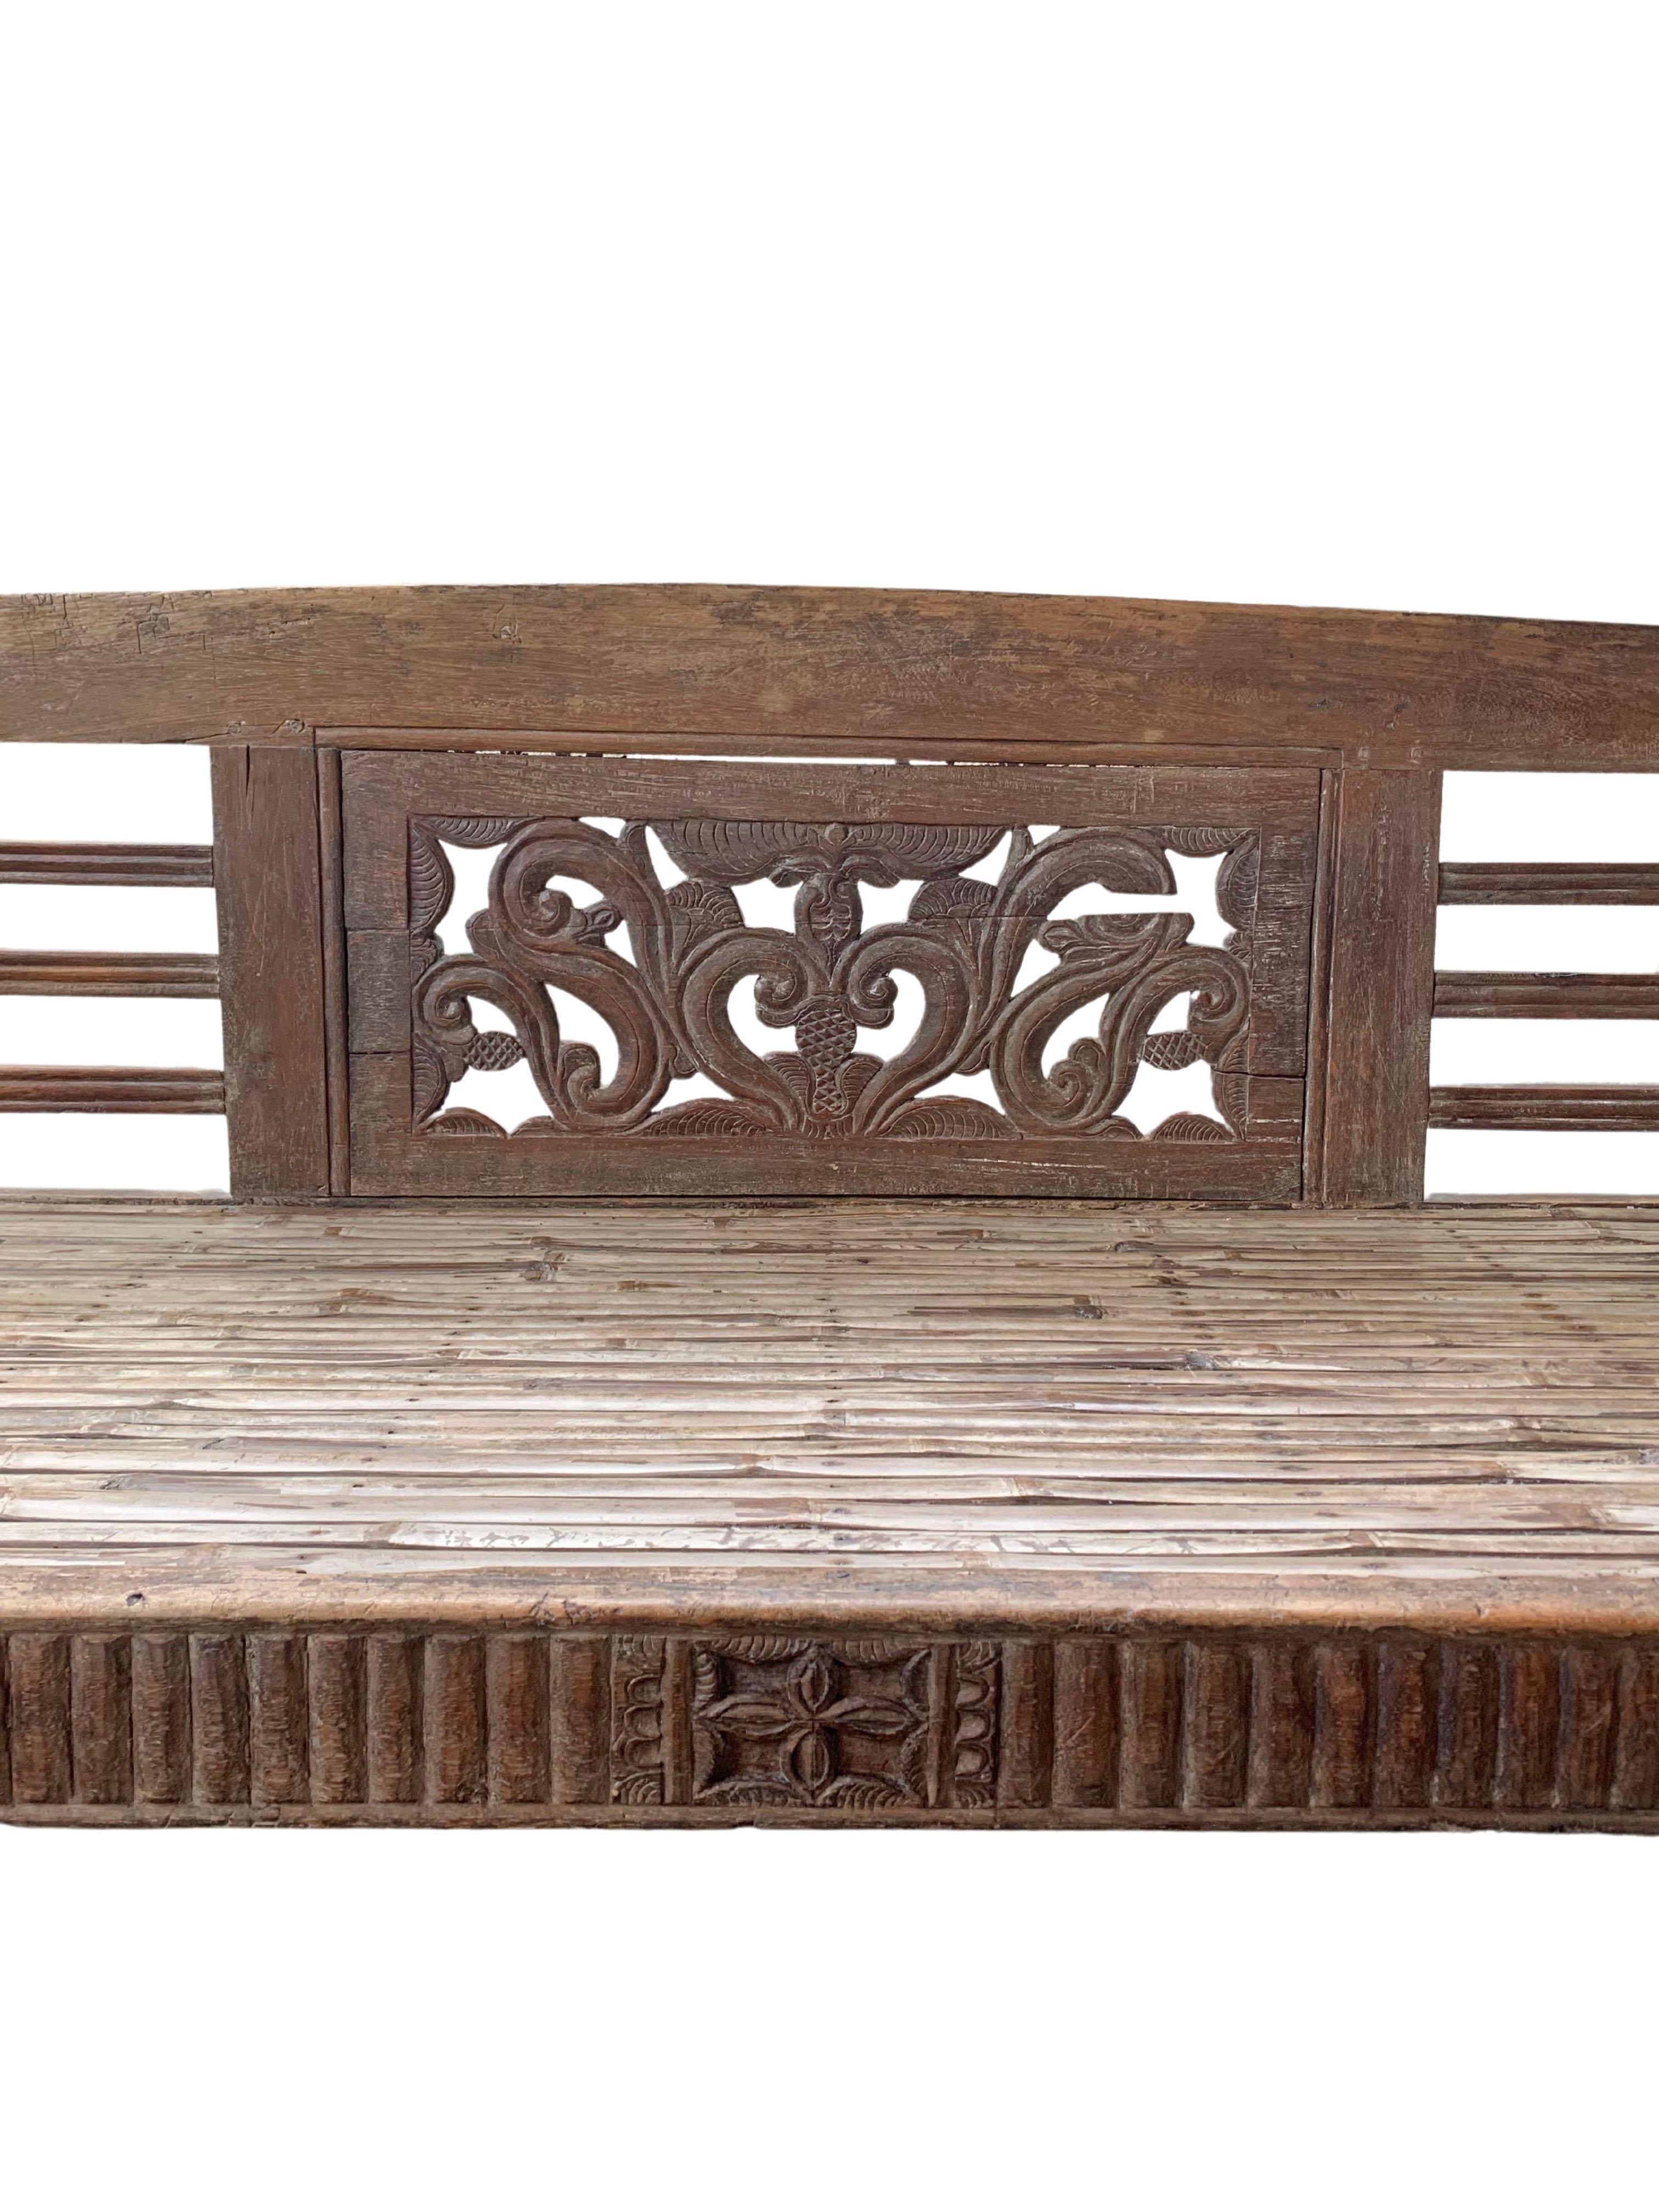 Indonesian Teak & Bamboo Bench with Carved Detailing Madura Island, Java, Indonesia c. 1950 For Sale